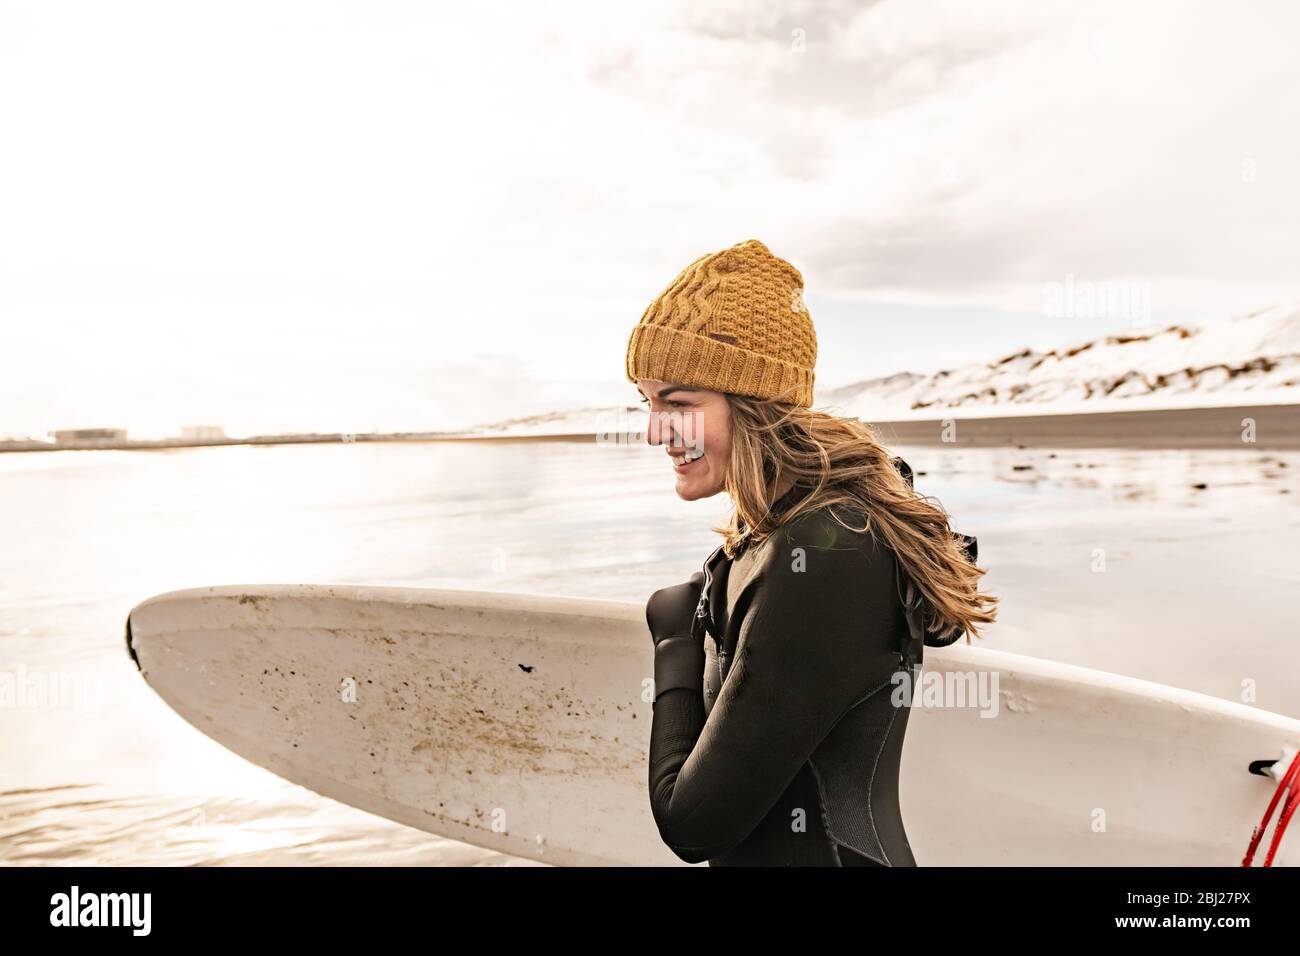 A woman wearing a wetsuit and woolly hat holding a surfboard on a beach with a snowy hill in the background. Stock Photo